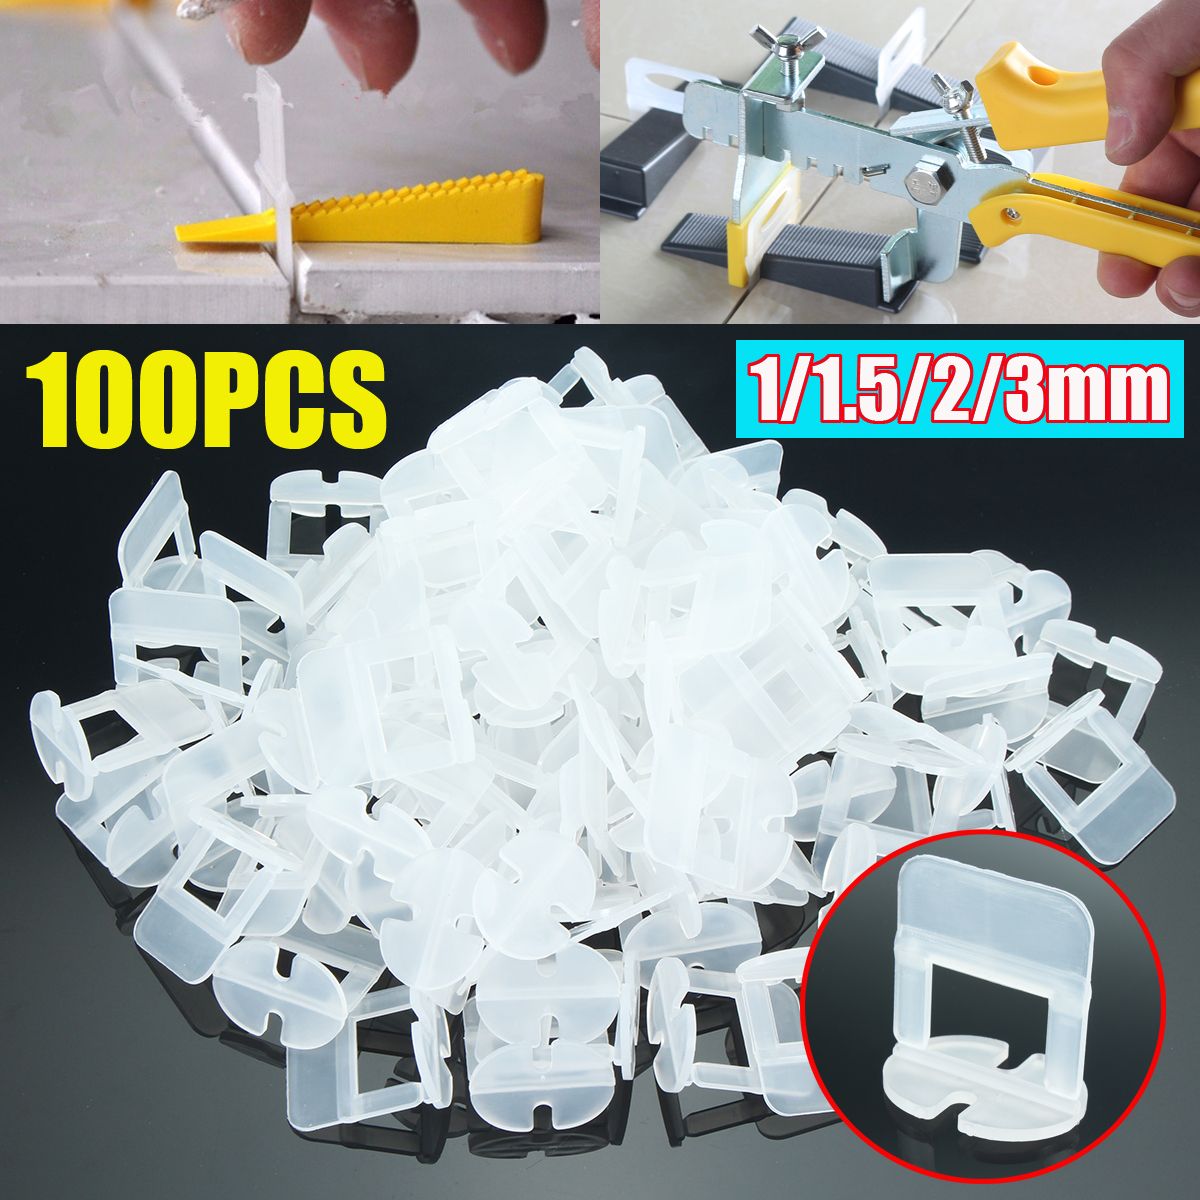 100Pcs-10152030mm-Tile-Leveling-System-Spacer-Clips-Floor-Wall-Tiling-Tool-1248356